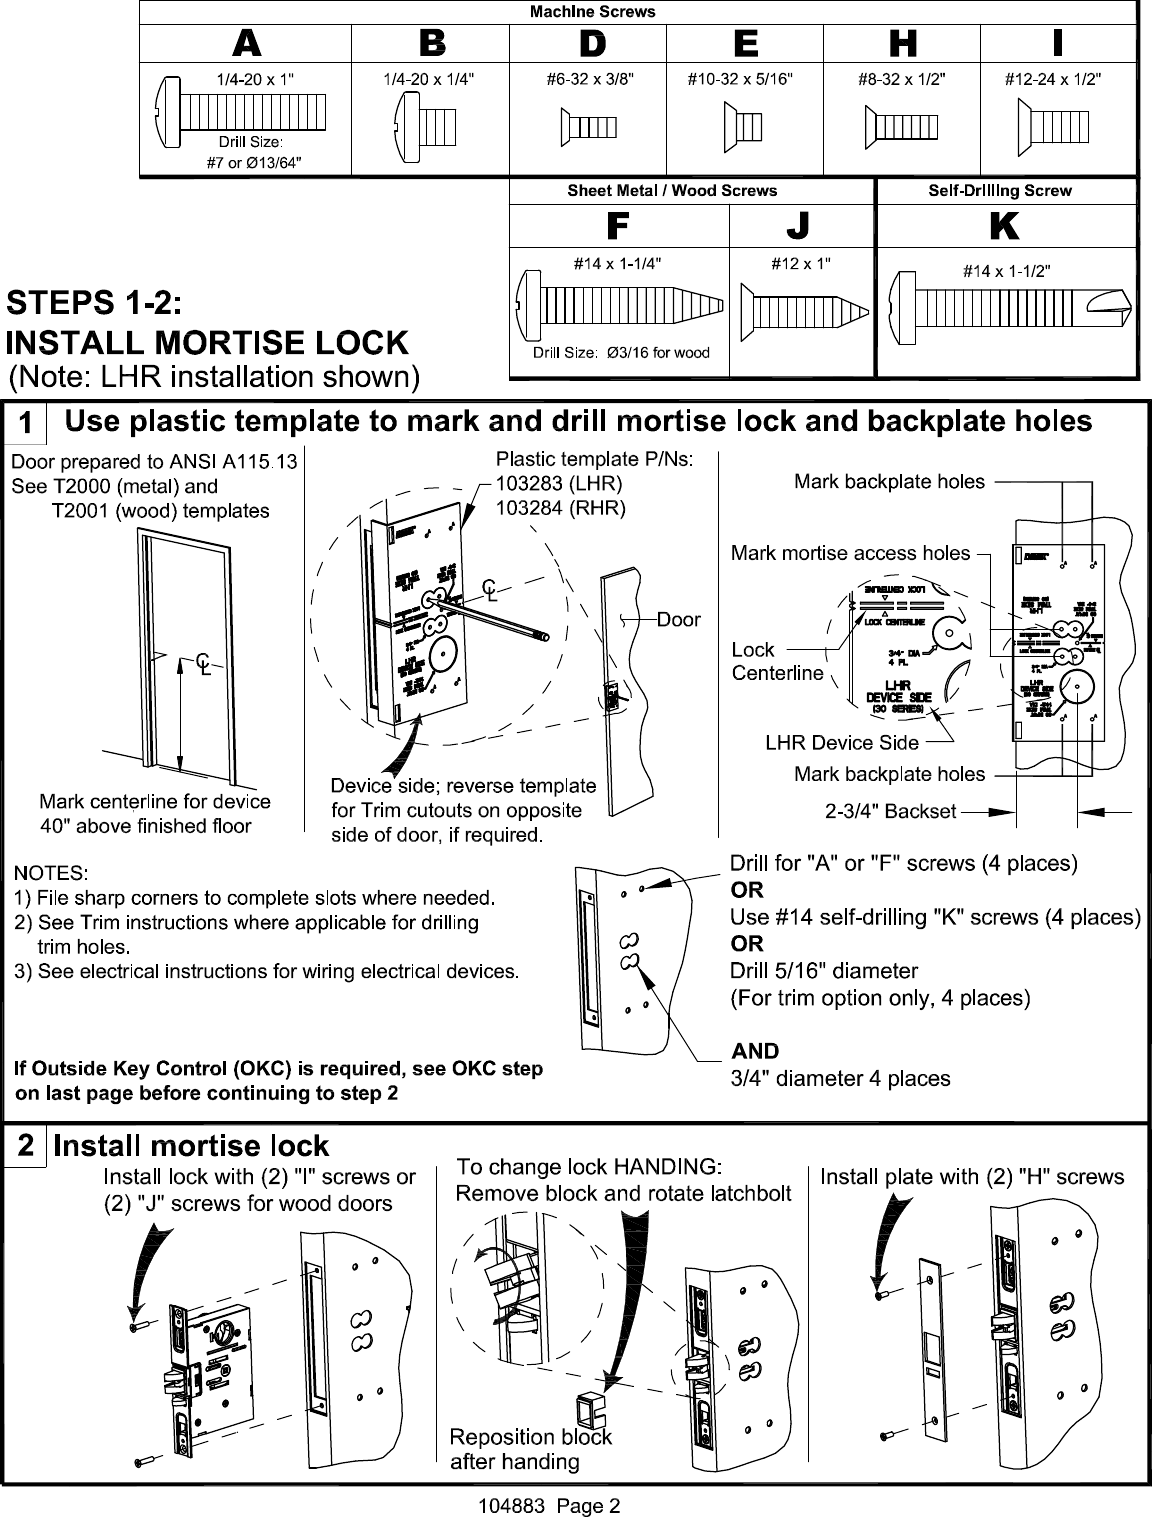 Page 2 of 4 - Detex R Installation Instructions For Advantex Mortise Lock 30/F30 Series Device And W S 104883